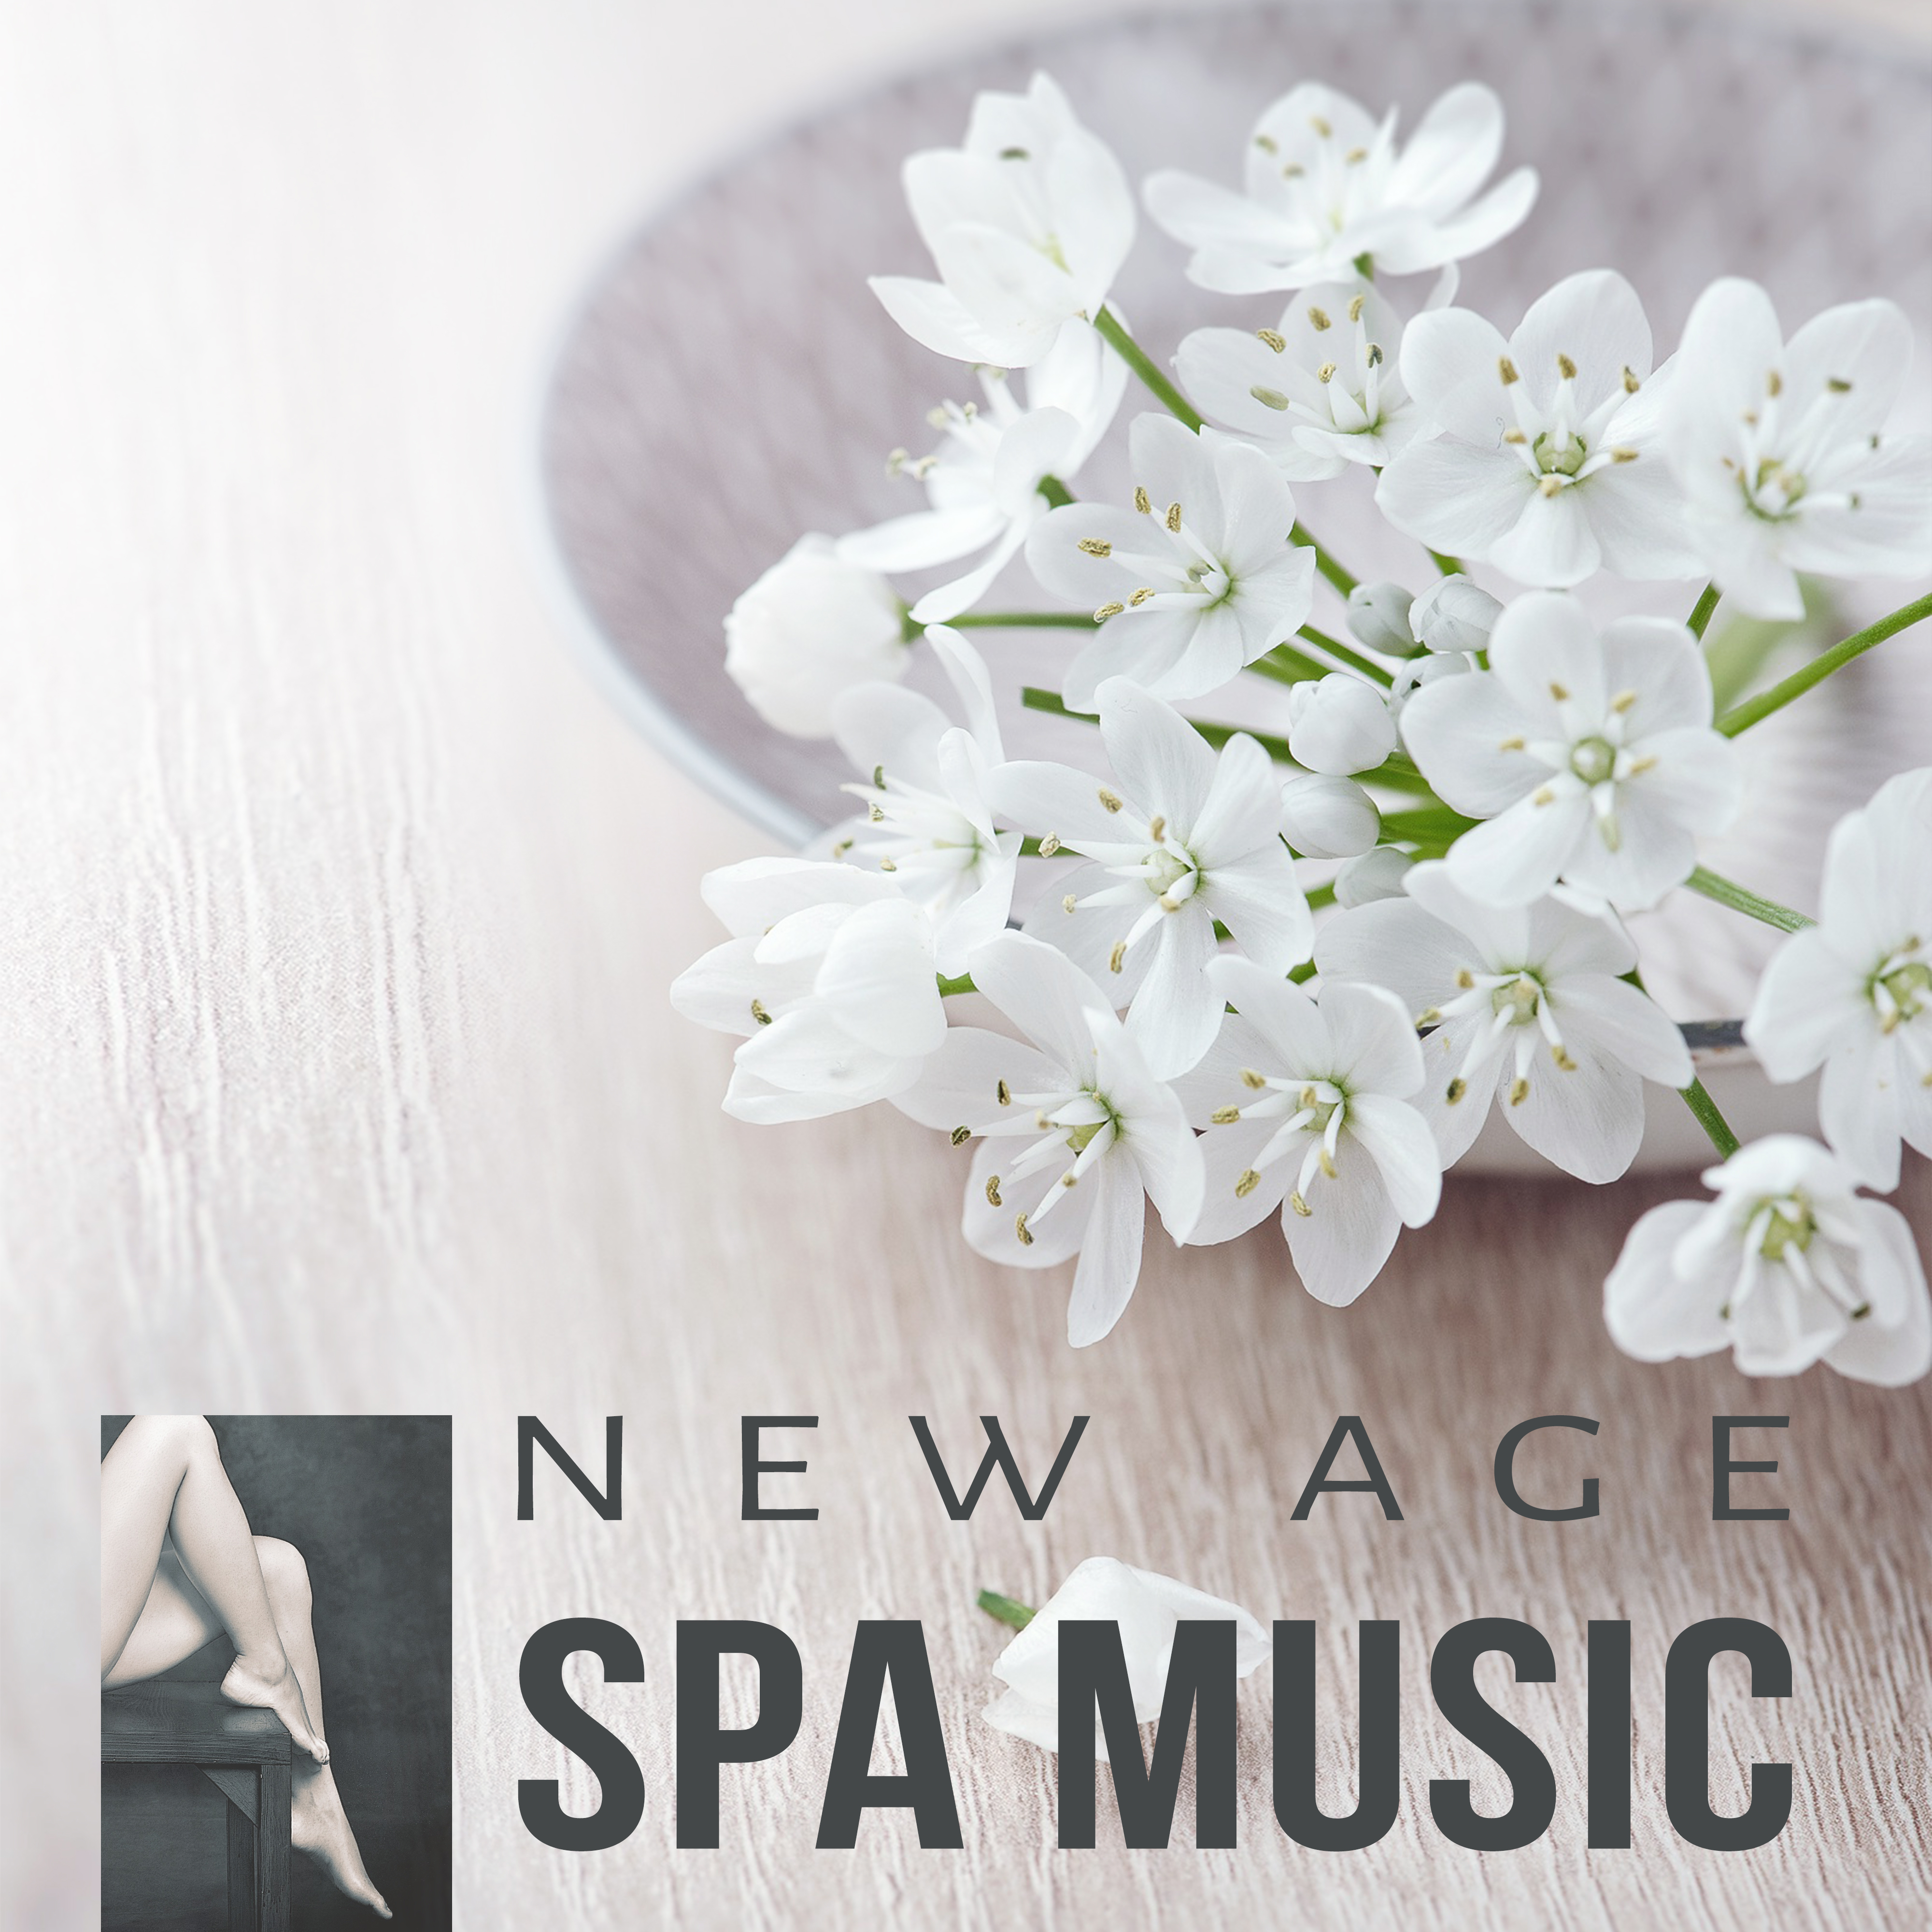 New Age Spa Music – Spa Relaxation, Soothing Birds Sounds, Chill Yourself in Spa